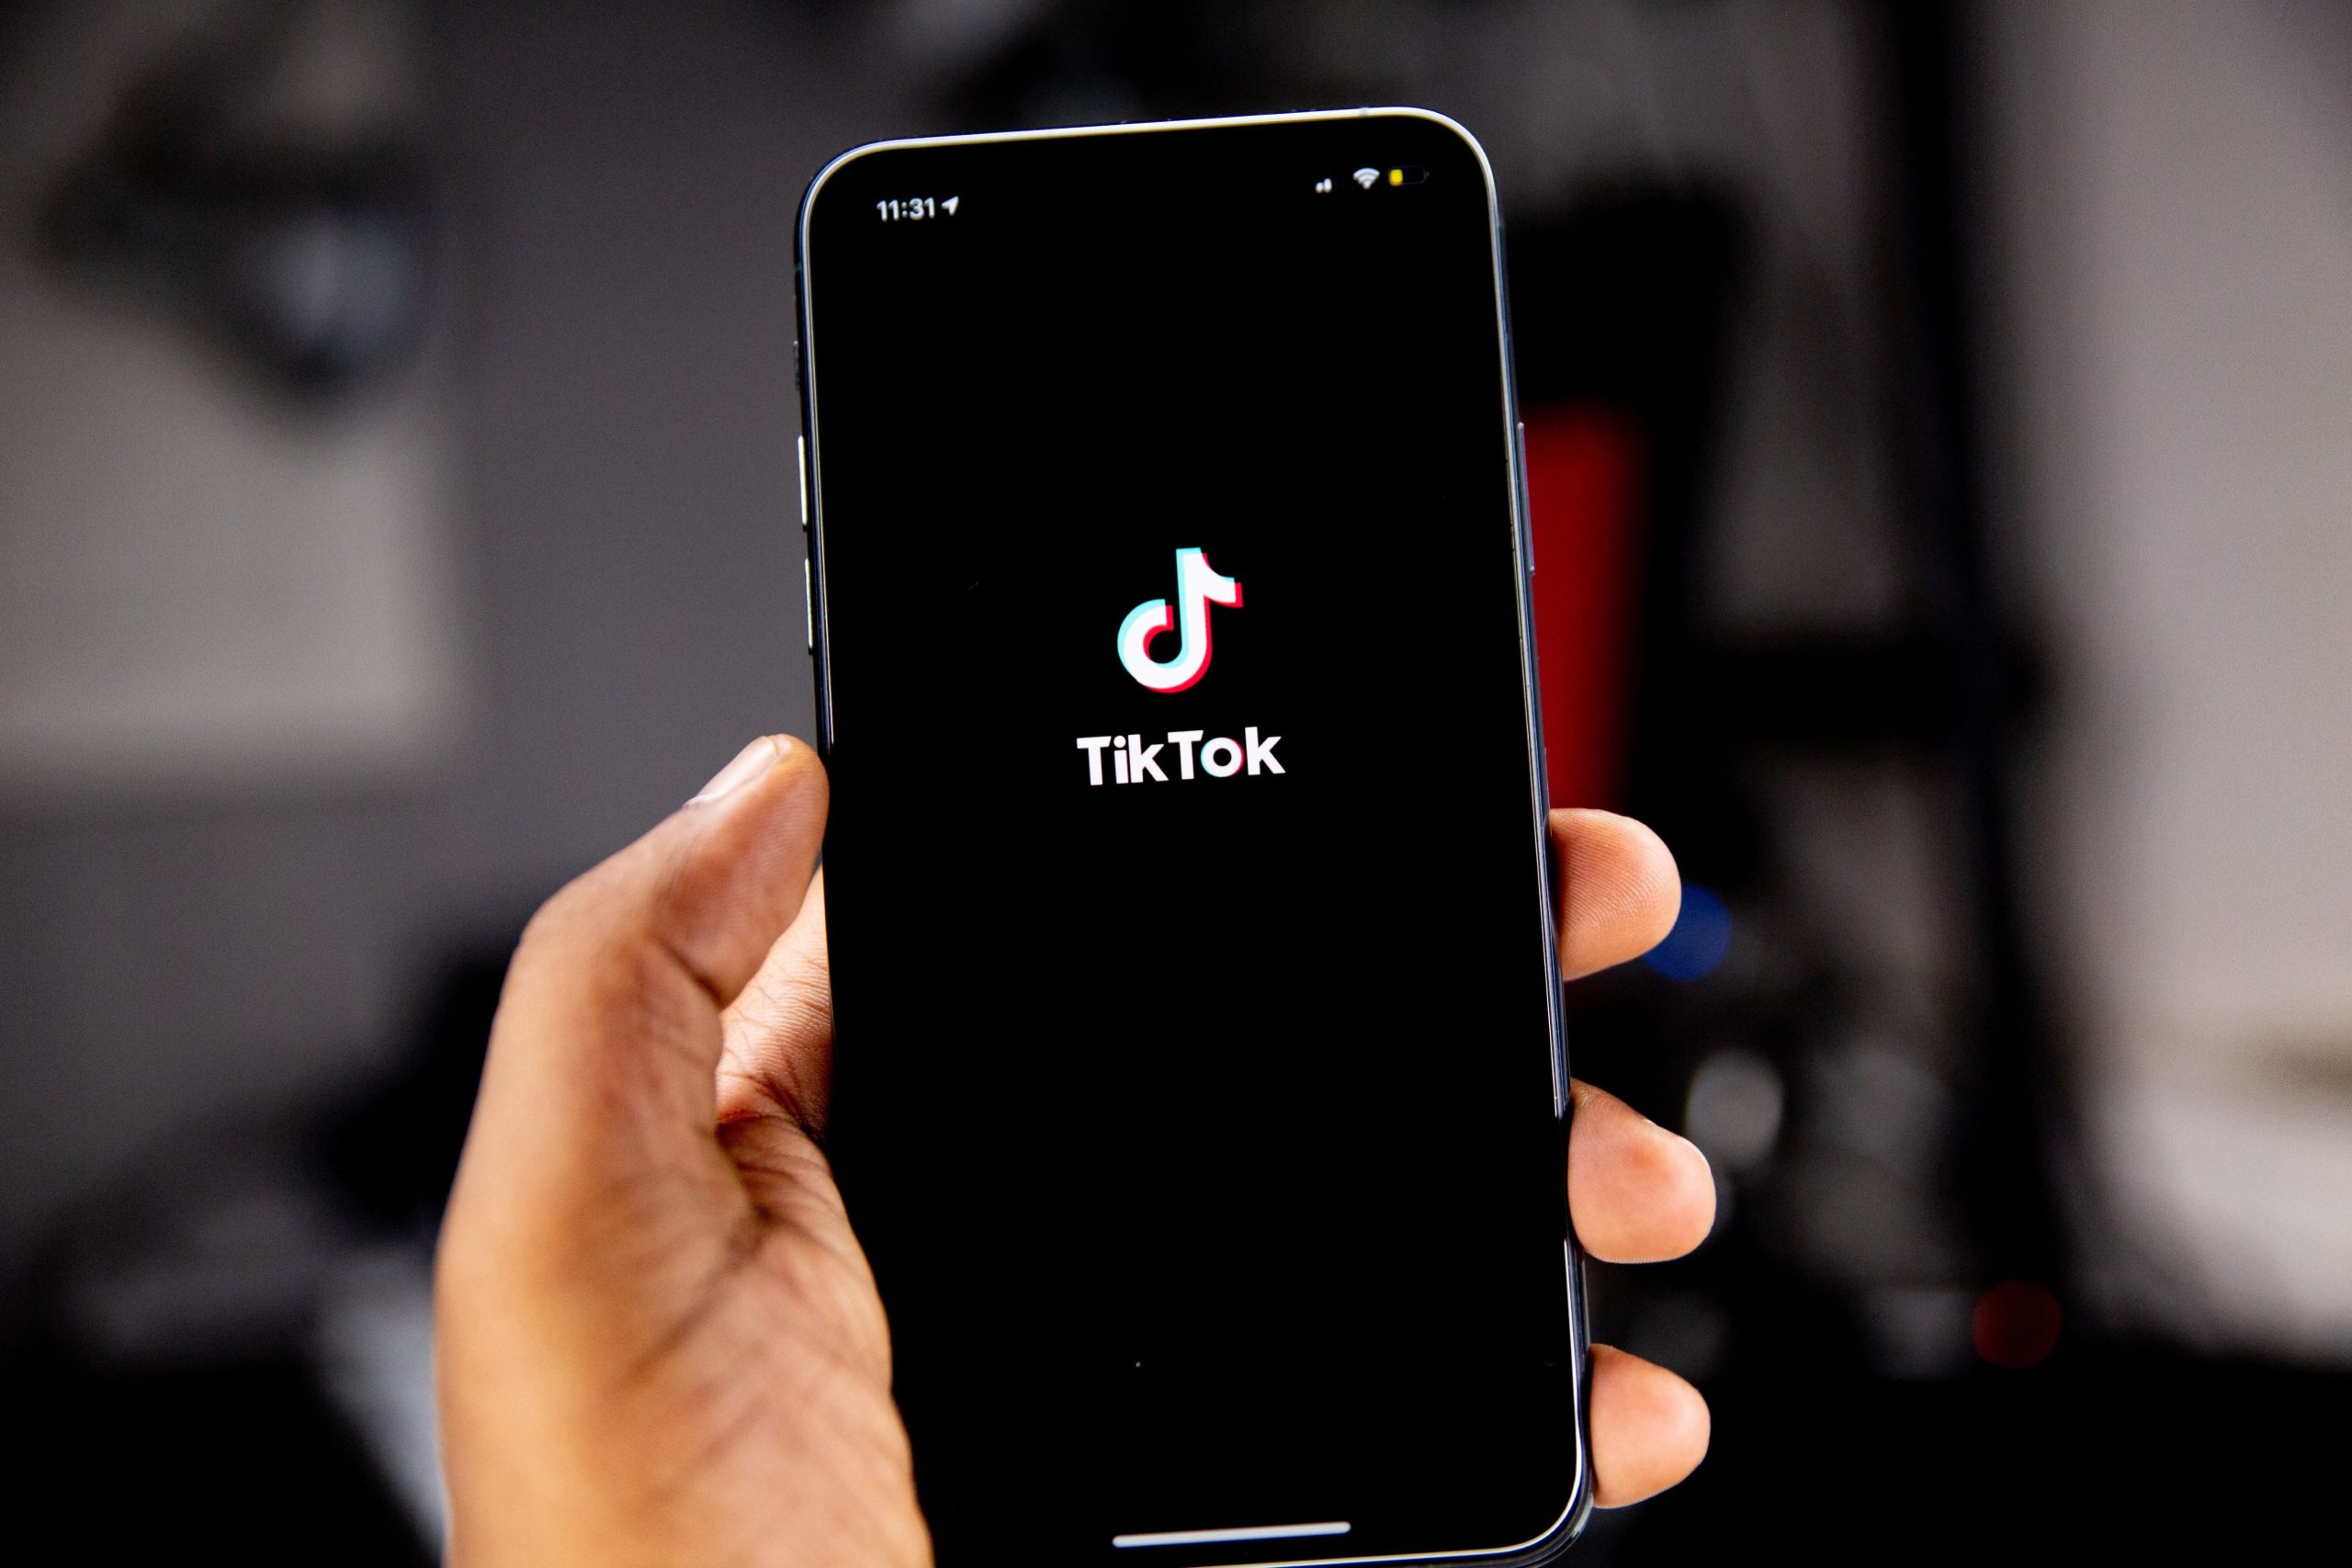 Someone holding a mobile phone displaying the TikTok home screen.